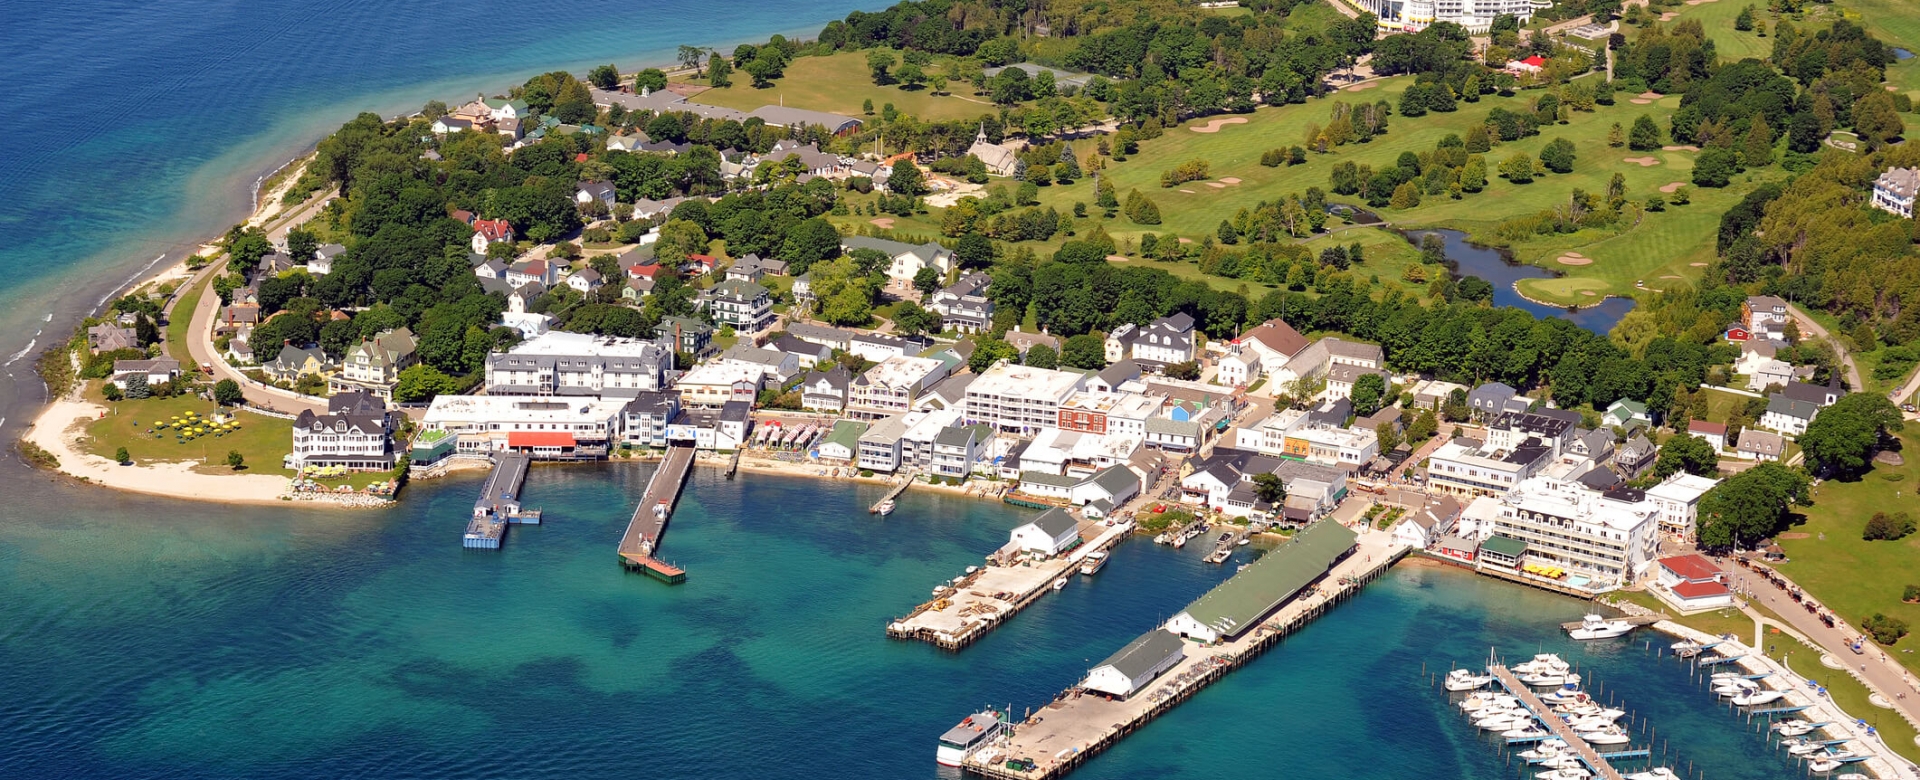 Aerial view of Grand Hotel and Downtown Mackinac